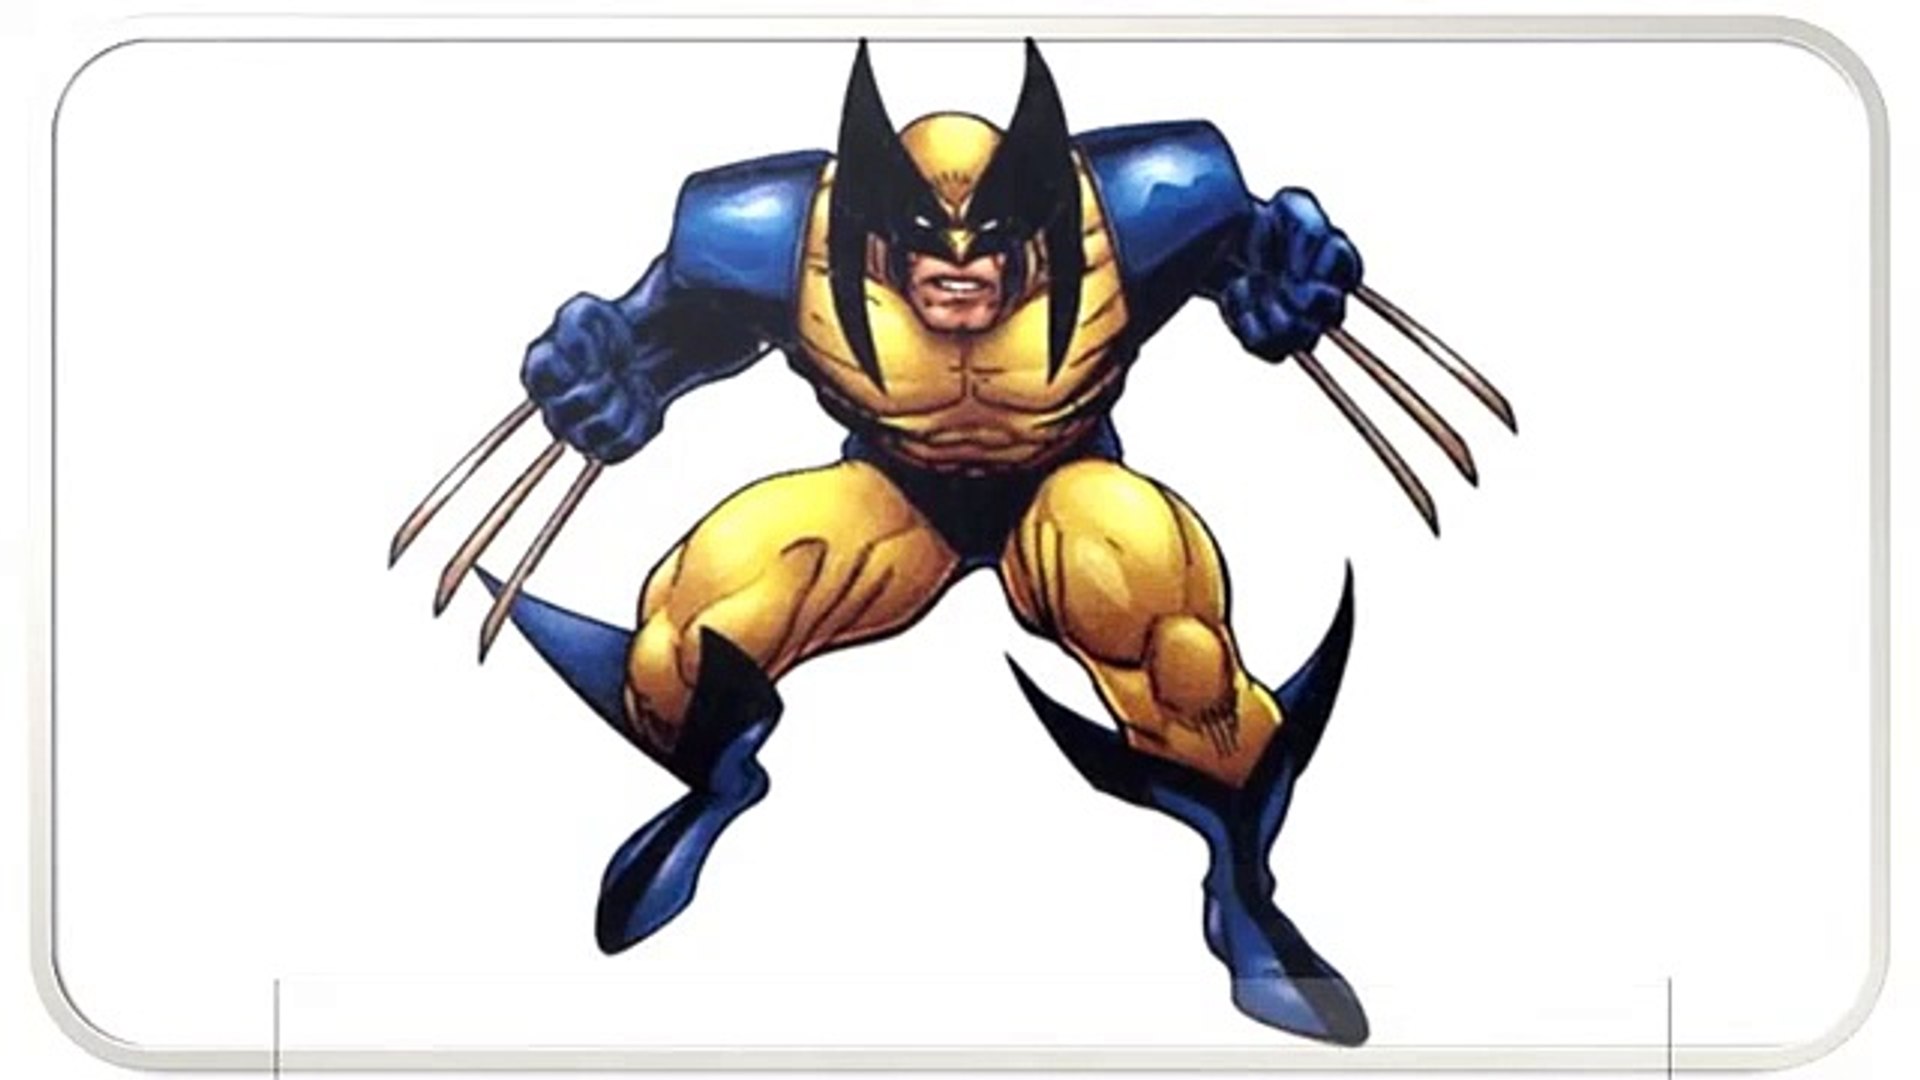 Wolverine Cartoon Pictures - video Dailymotion